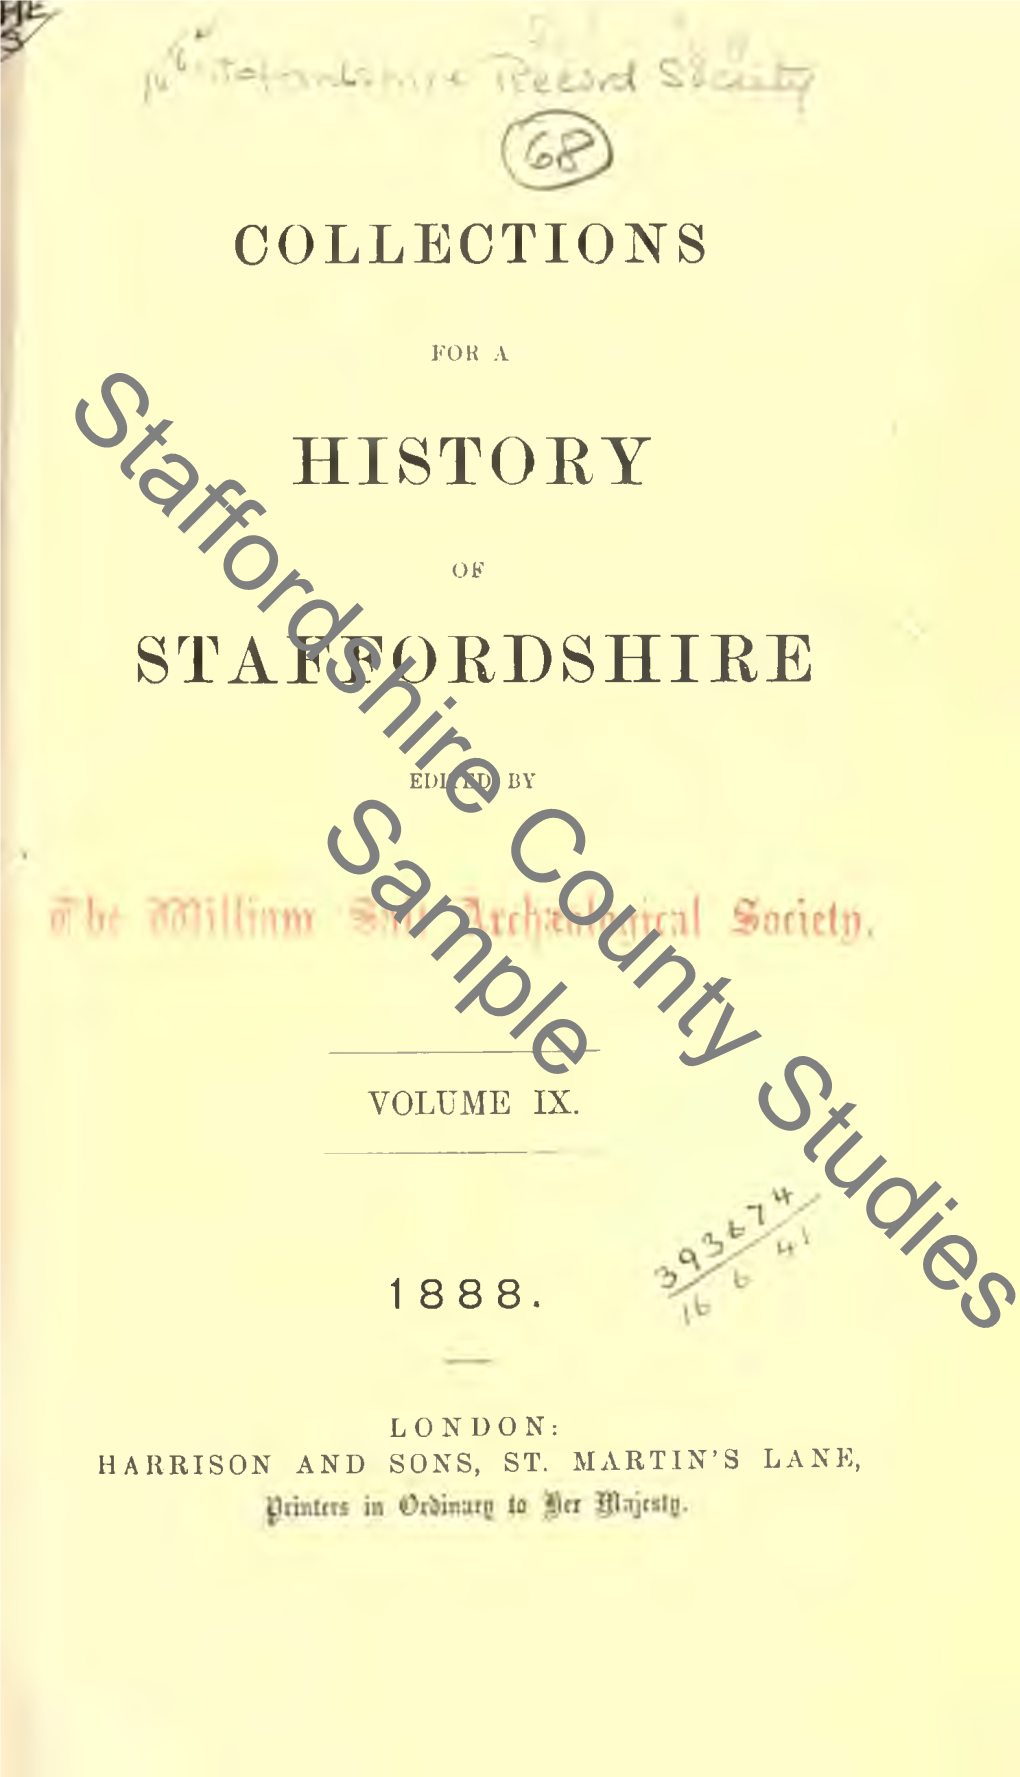 Collections for a History of Staffordshire, 1888